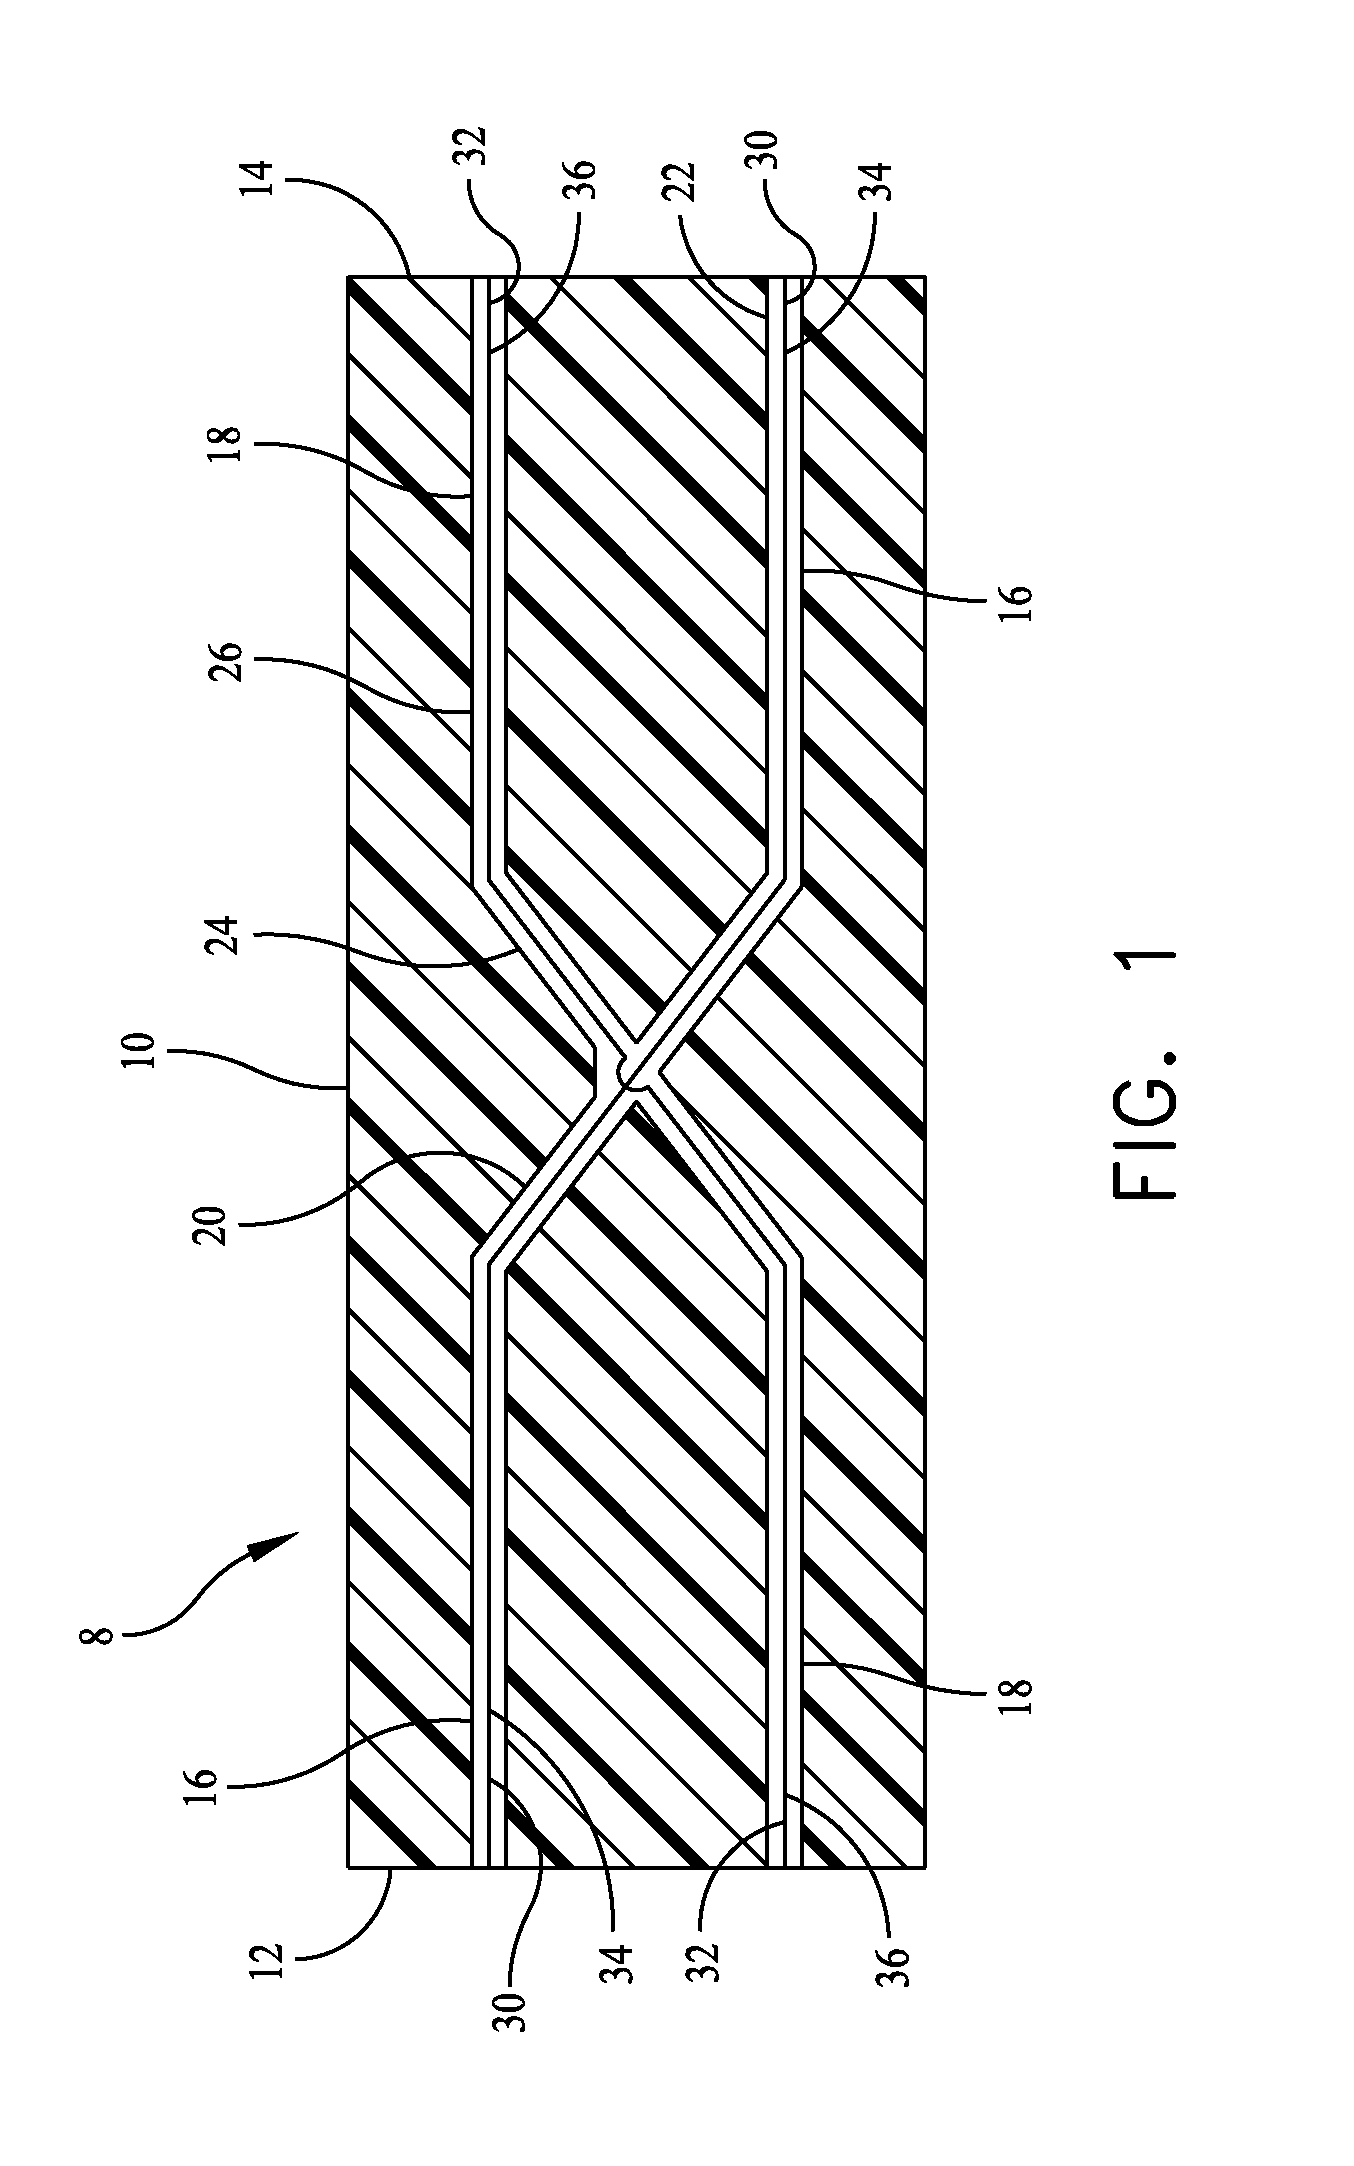 Electrical cable harness and assembly for transmitting ac electrical power